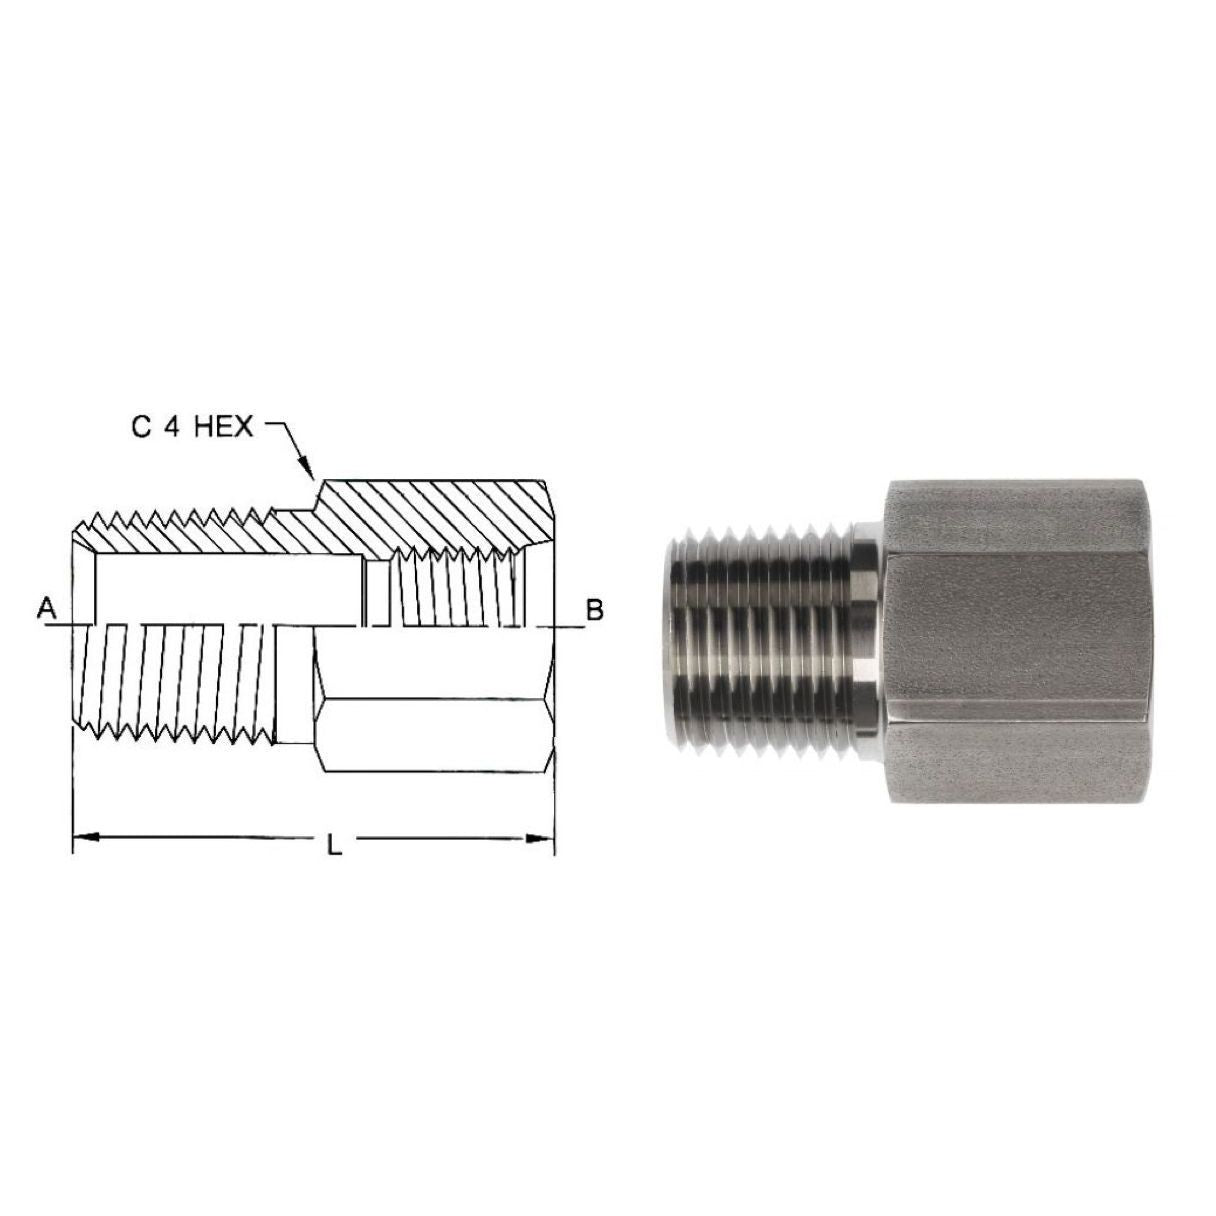 6404-05-06 : OneHydraulics Adapter, Straight, 0.3125 (5/16") Female ORB x 0.375 (3/8") Male, Steel, 6000psi